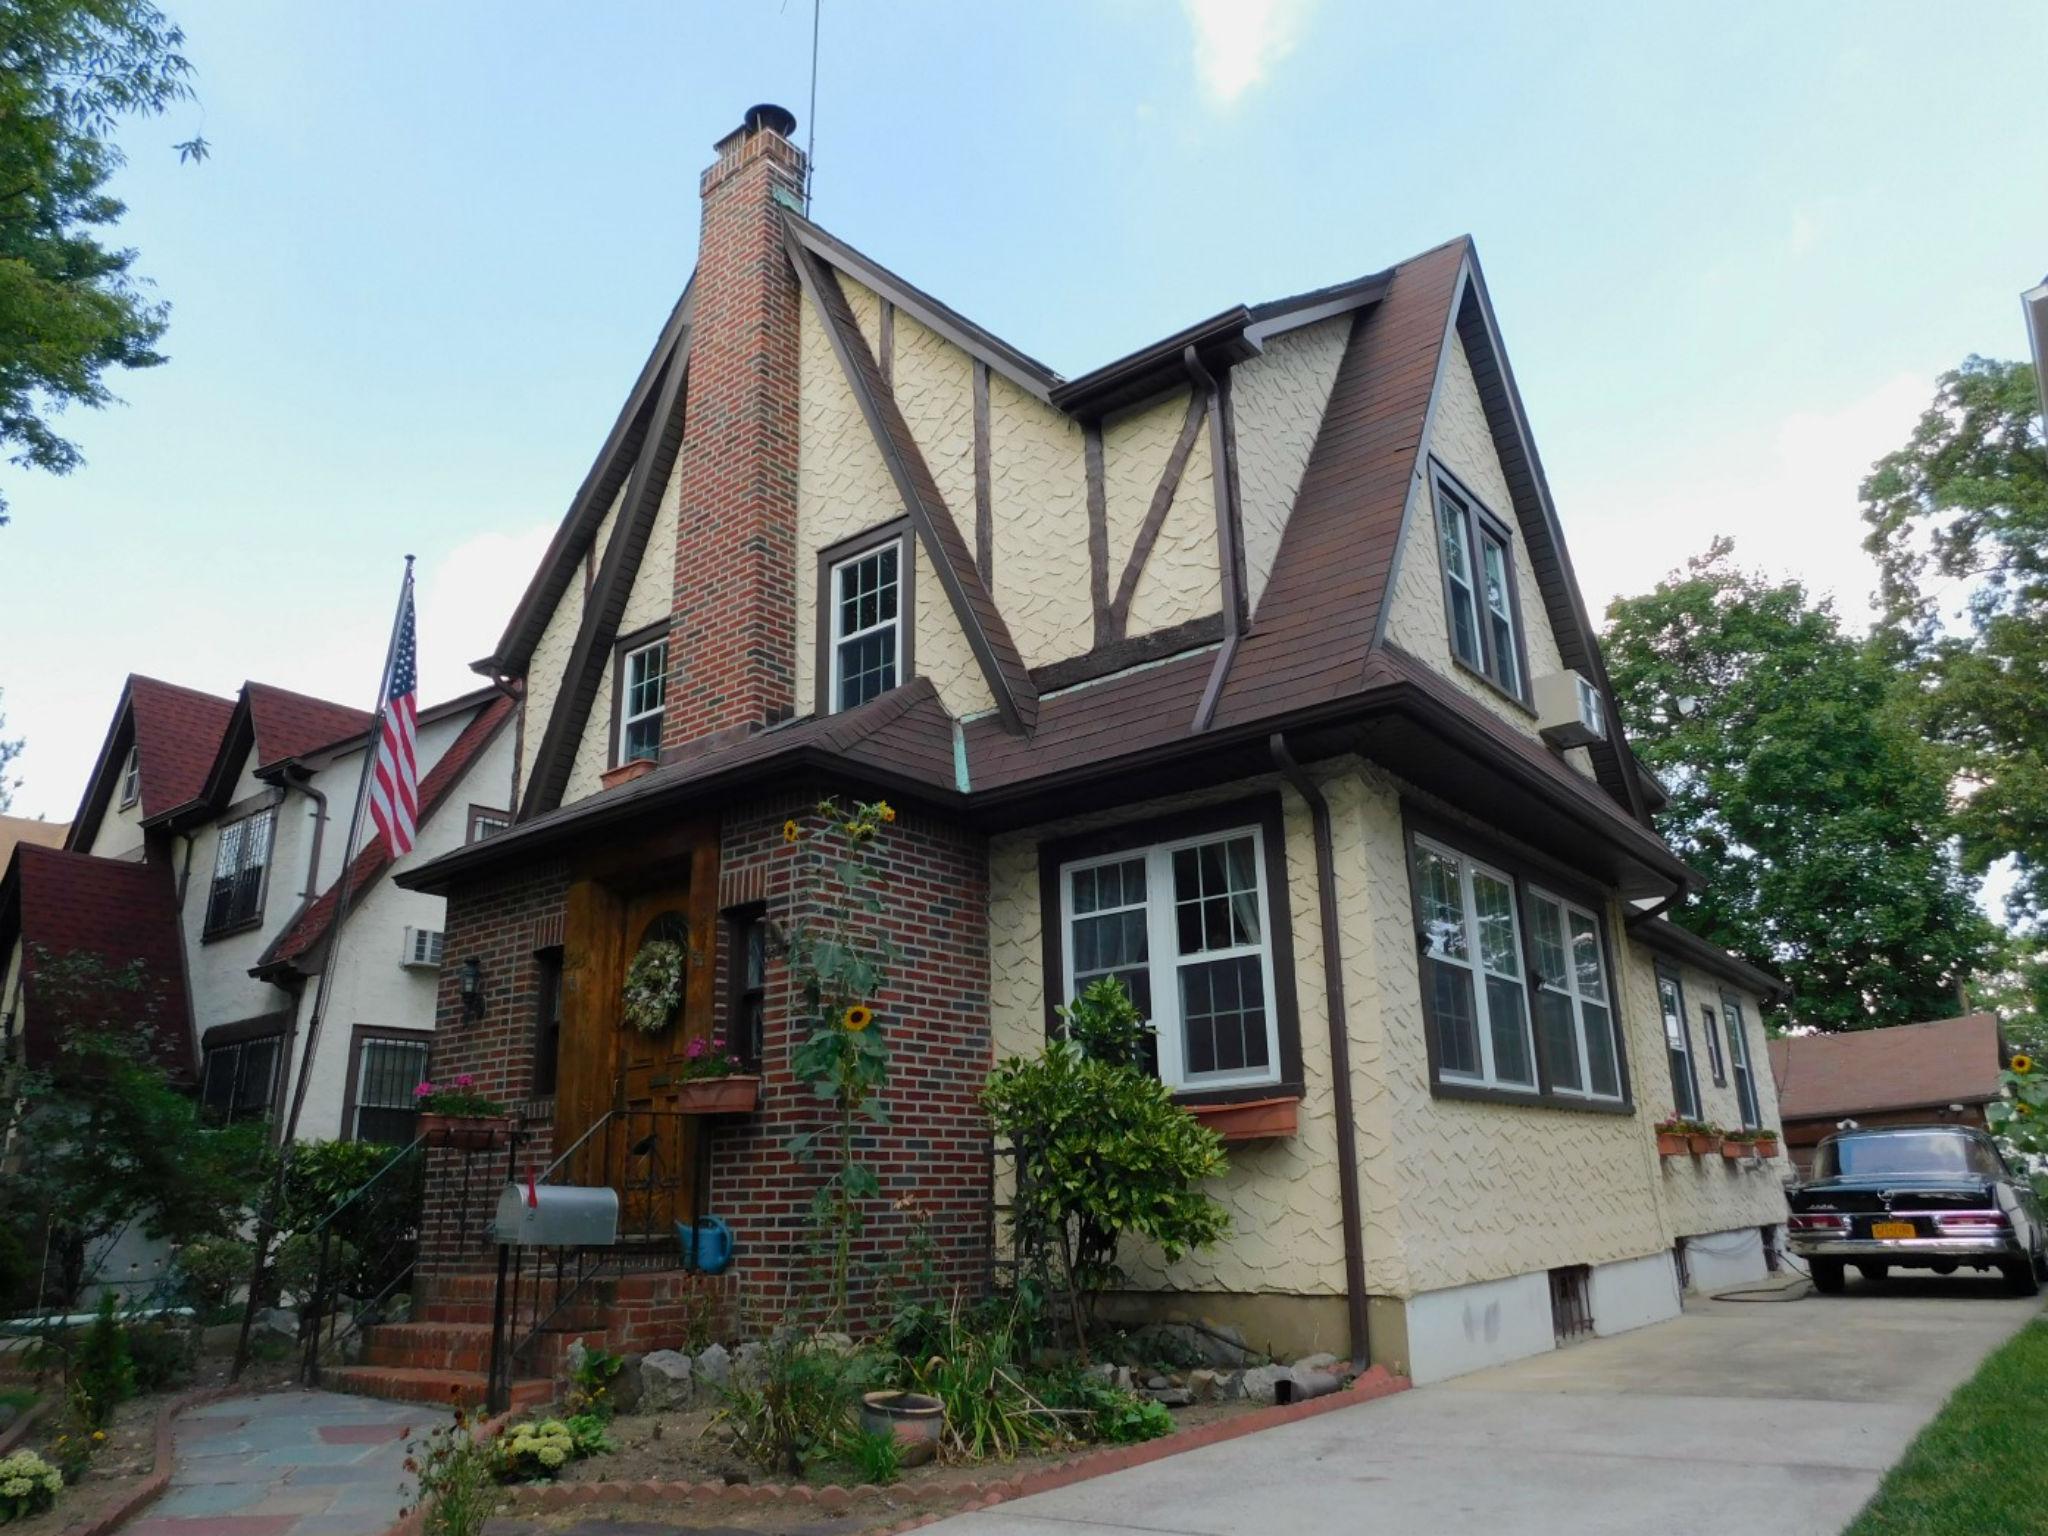 The stucco, tudor house is on the market for $1.25 million